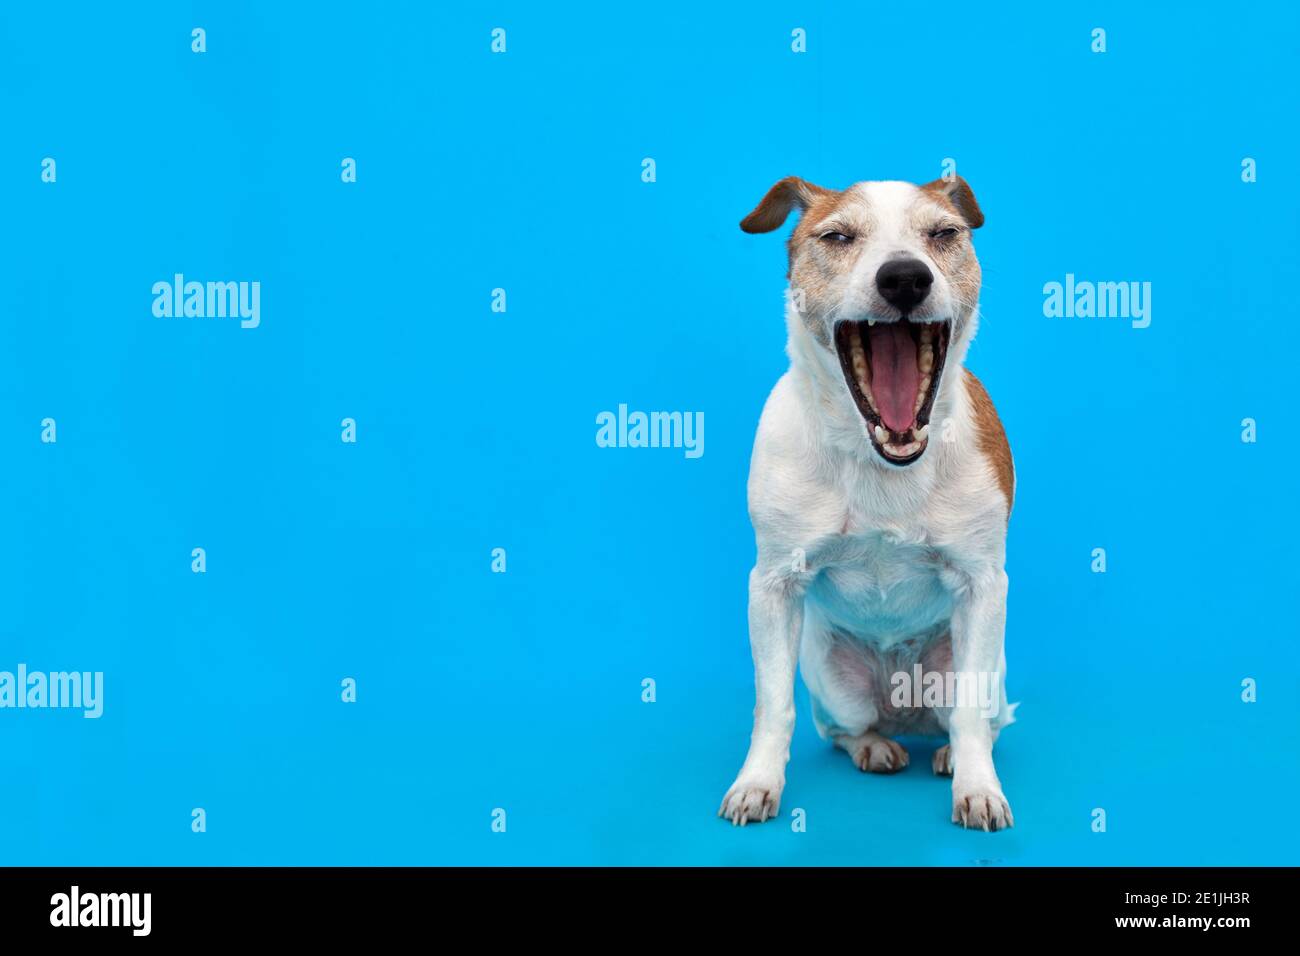 Adorable Jack Russell Terrier dog yawning sweetly with closed eyes on bright blue background in studio Stock Photo